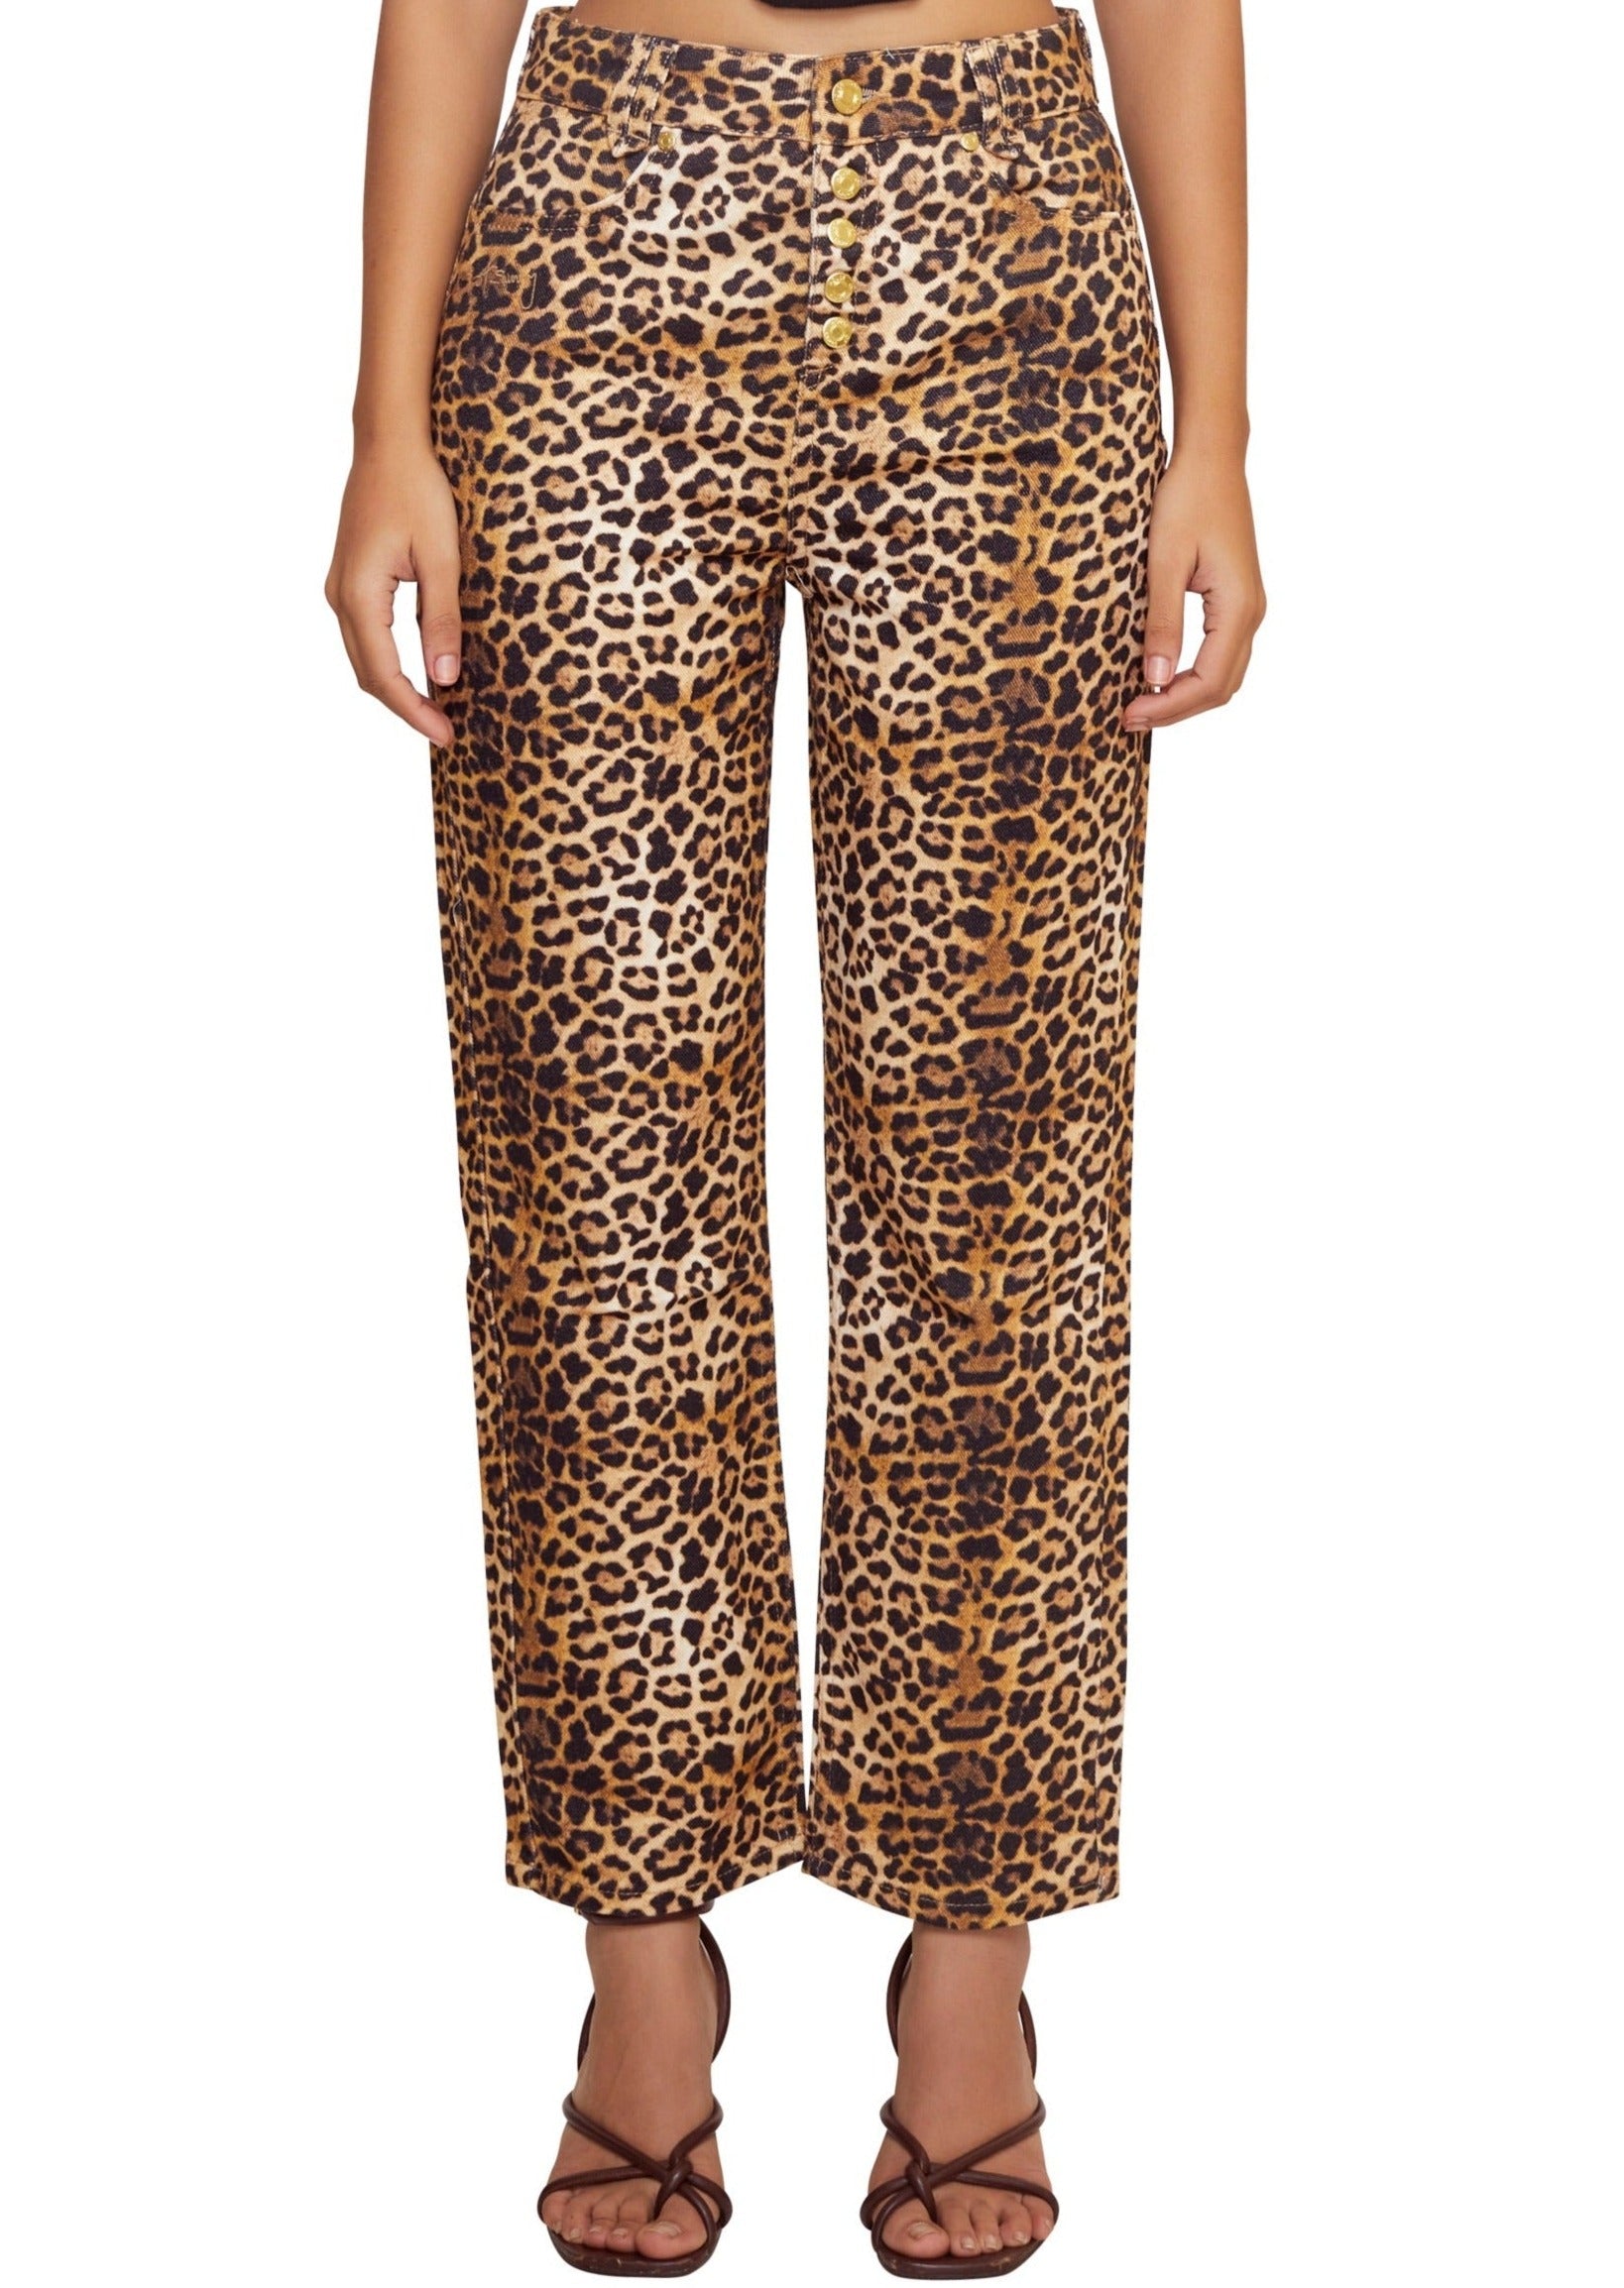 Black and yellow Leopard print classic hofs jessie pants from the brand House Of Sunny